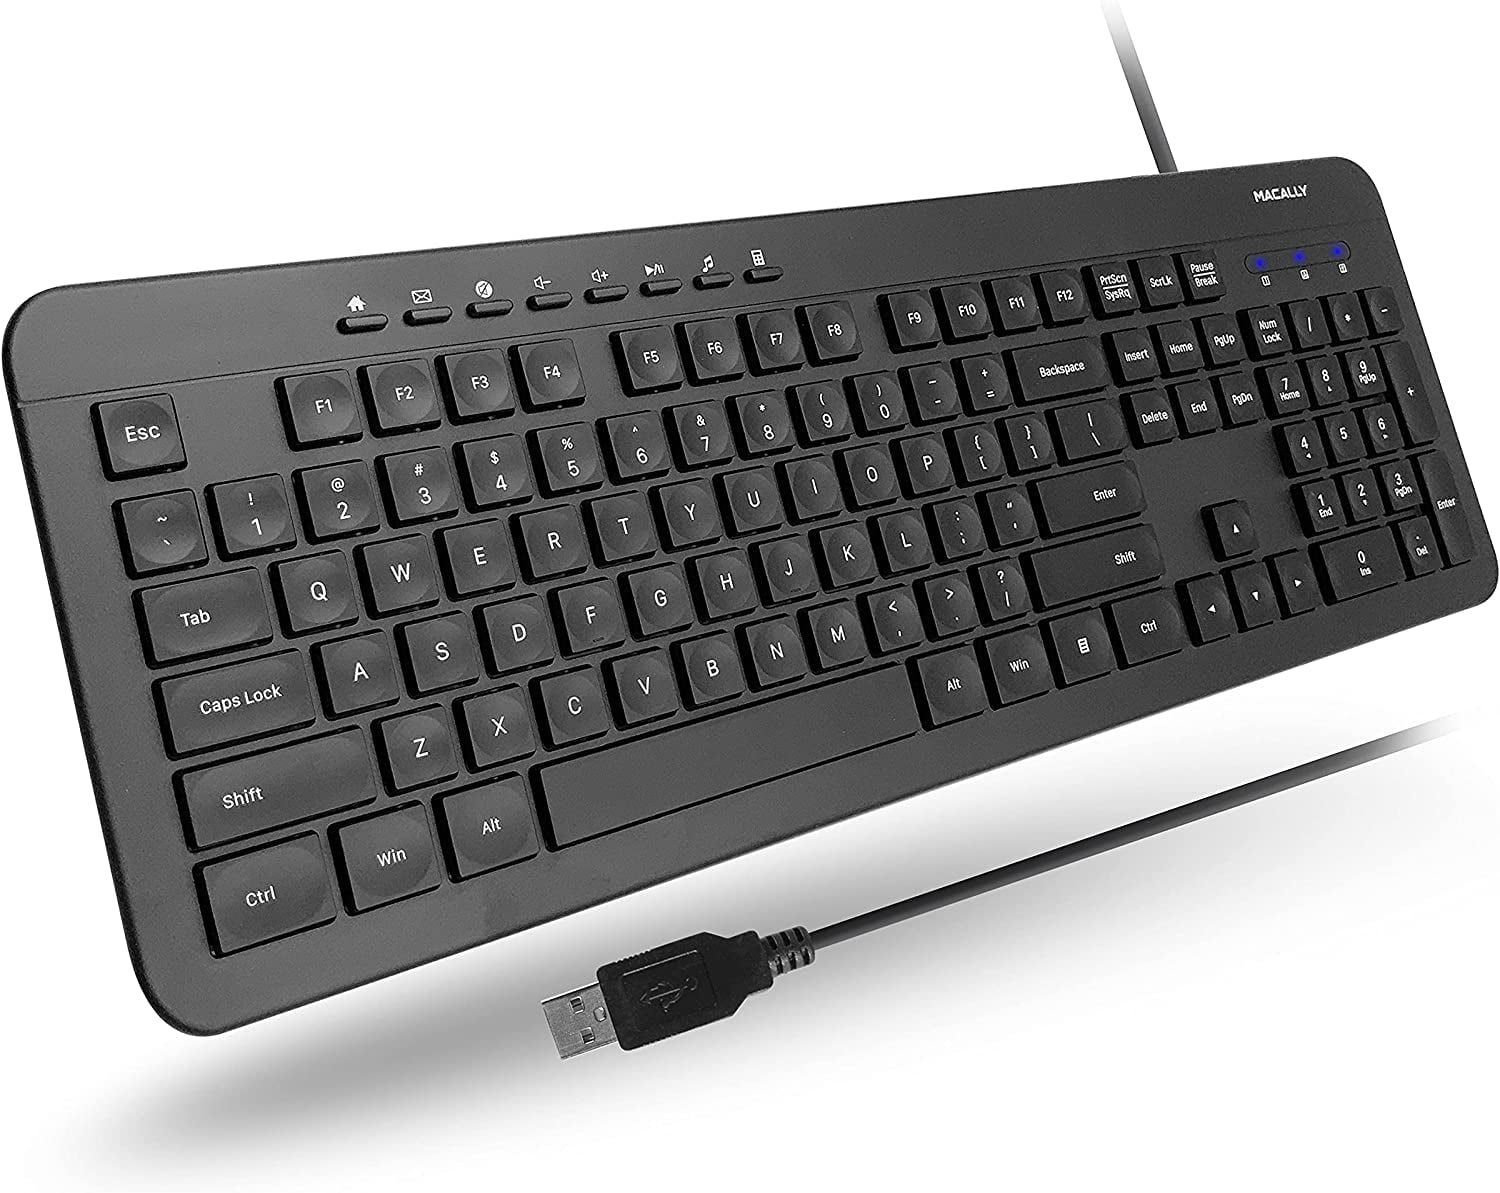 Logitech K120 Wired Keyboard Black Windows, Full-Size, PC, Spill-Resistant, Laptop, with Space USB for Curved Bar, Plug-and-Play, Compatible